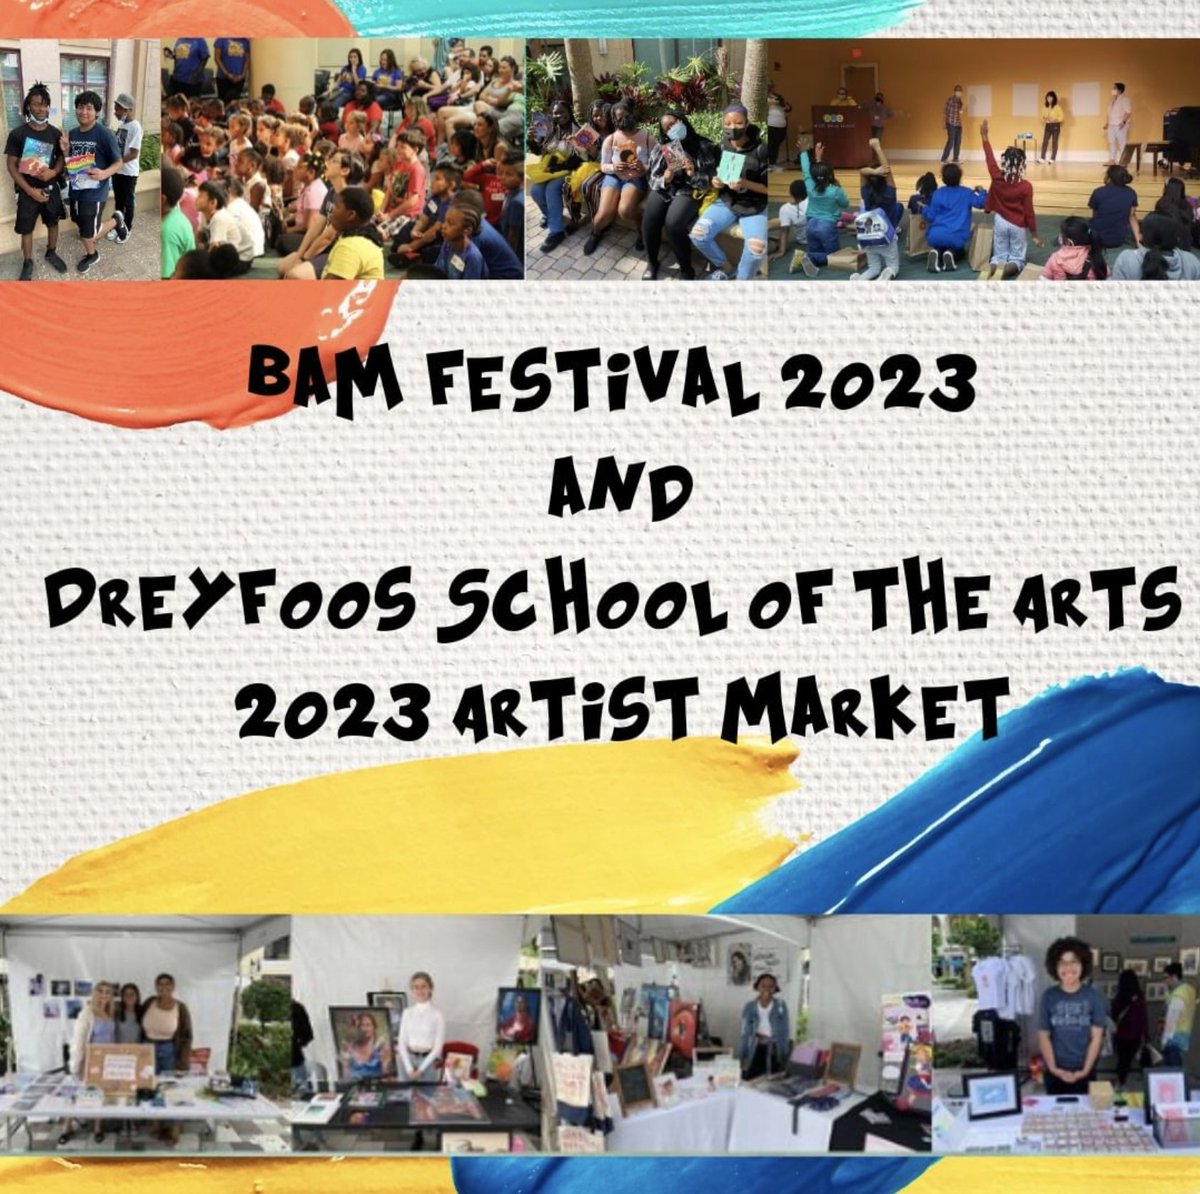 Dreyfoos School of the Arts Visual Art & Digital Media 2023 Artist Market, in collaboration with BAM Festival 2023, is happening this Saturday, April 15th, from 10 am - 4 pm by the Mandel Public Library on Clematis Street! Graphic Courtesy of @bamwpb